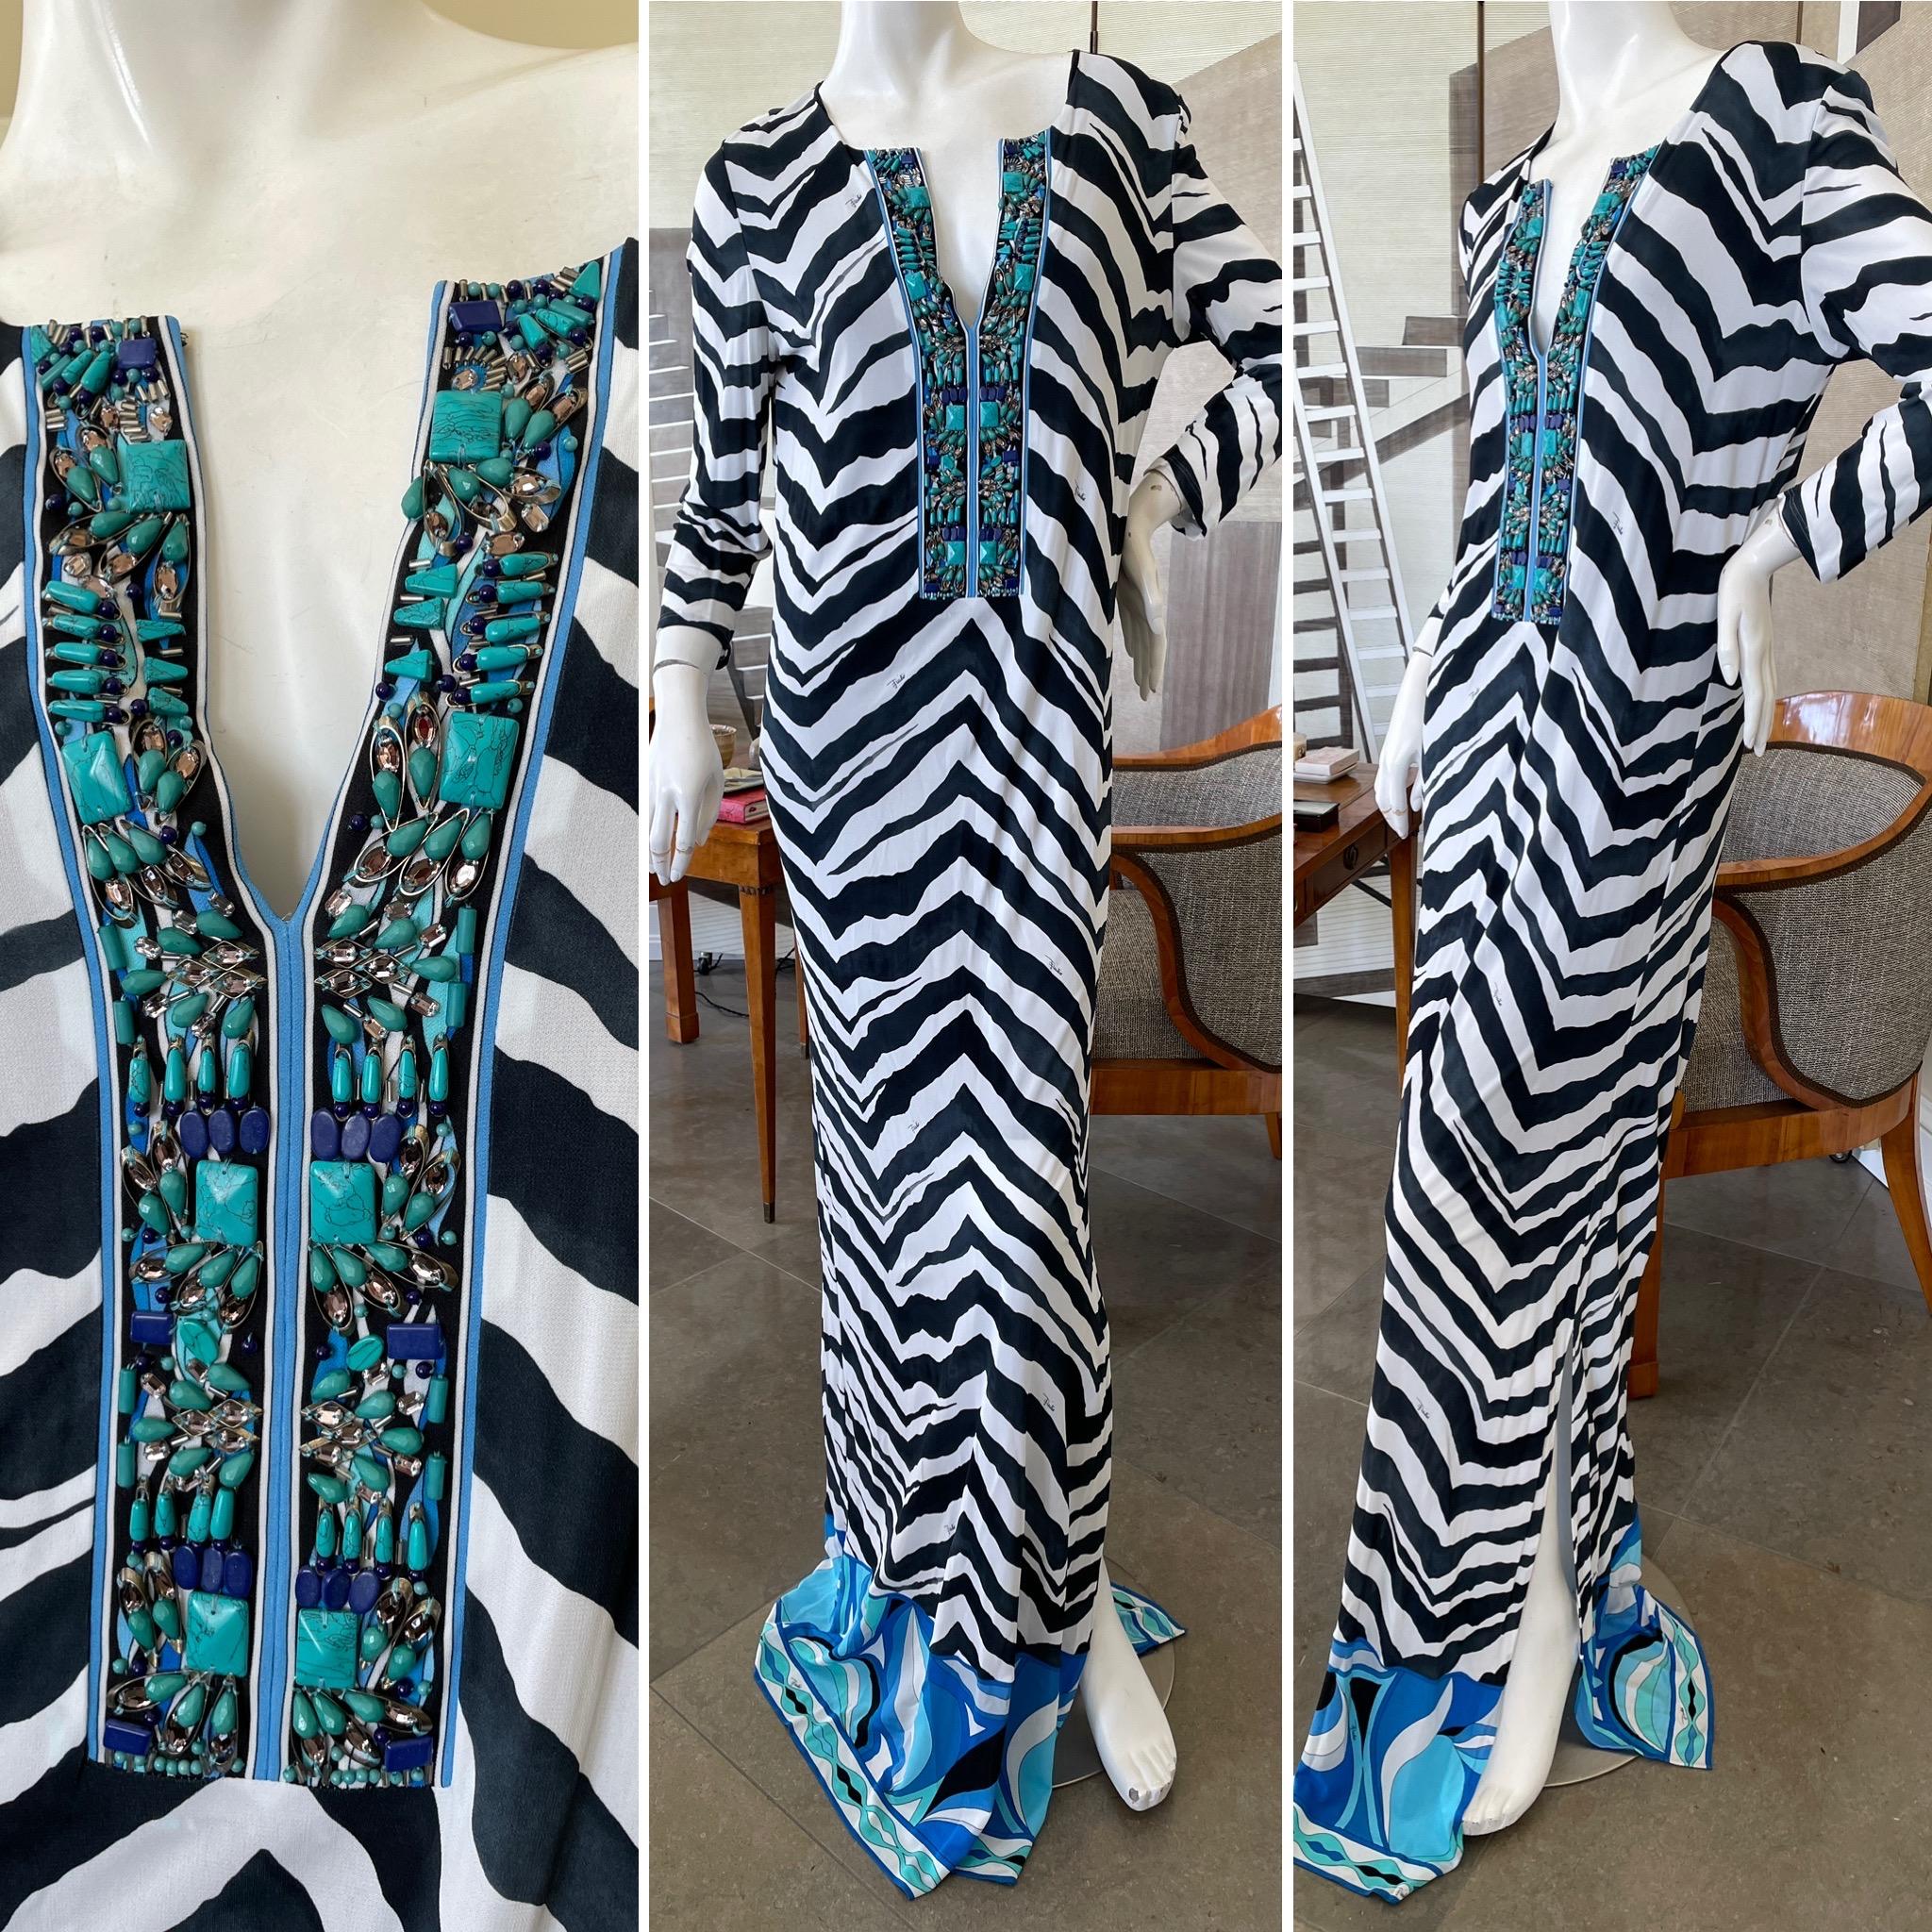 Emilio Pucci Low Cut Zebra Pattern Embellished Caftan Style Dress
So beautiful, please use the zoom feature to see the details. 
 Size 12 US
Bust 40